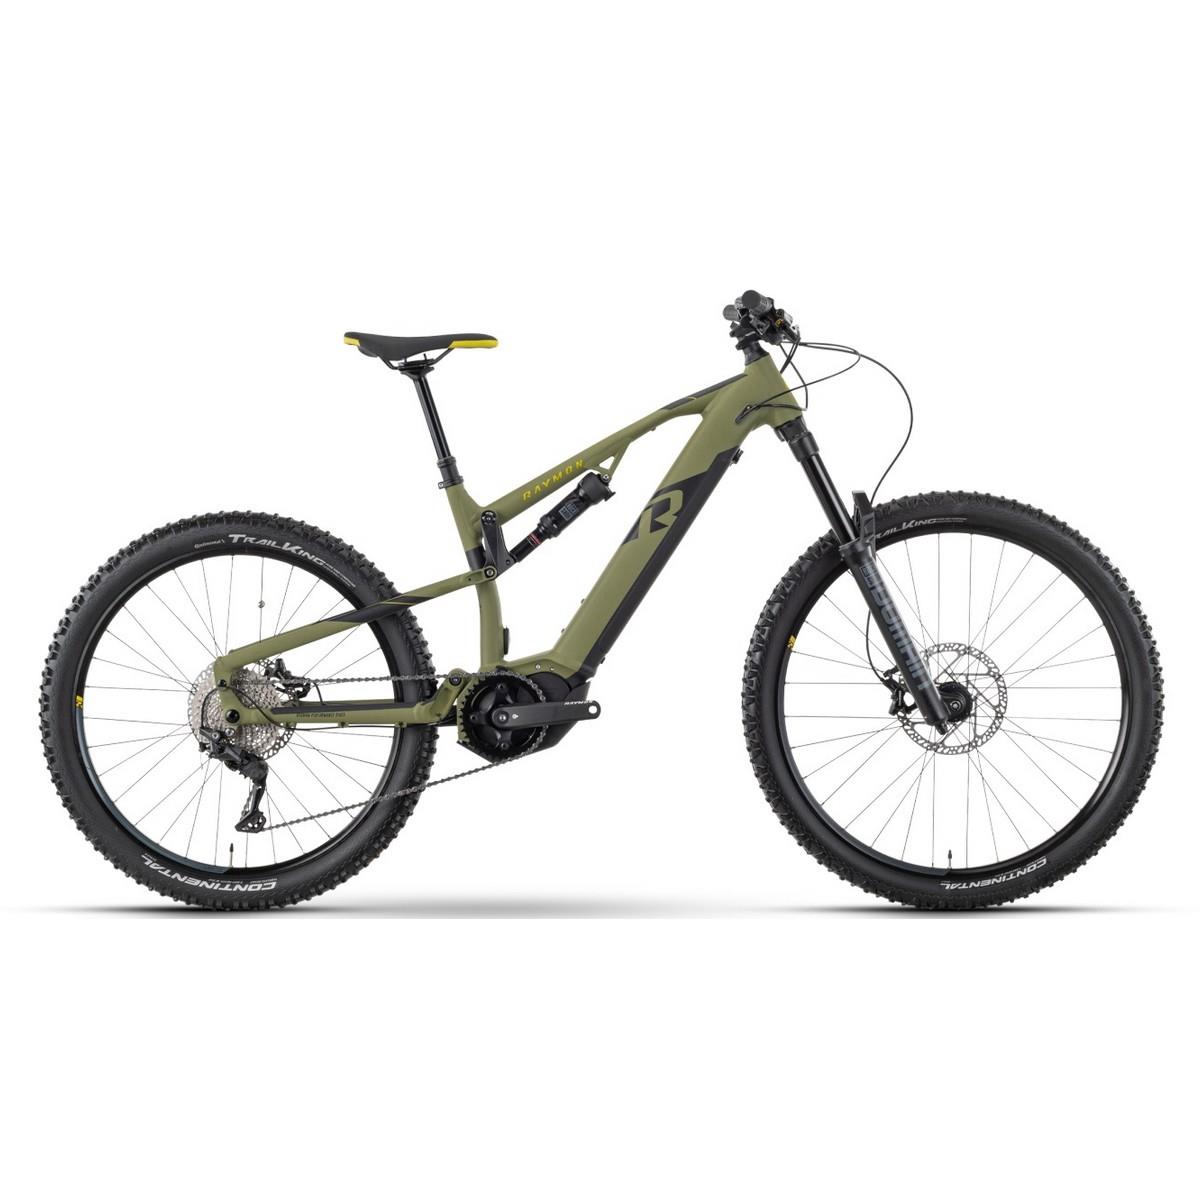 TrailRay 160E 8.0 29/27.5'' 160mm 10s 630Wh Yamaha PW-X2 Green size S